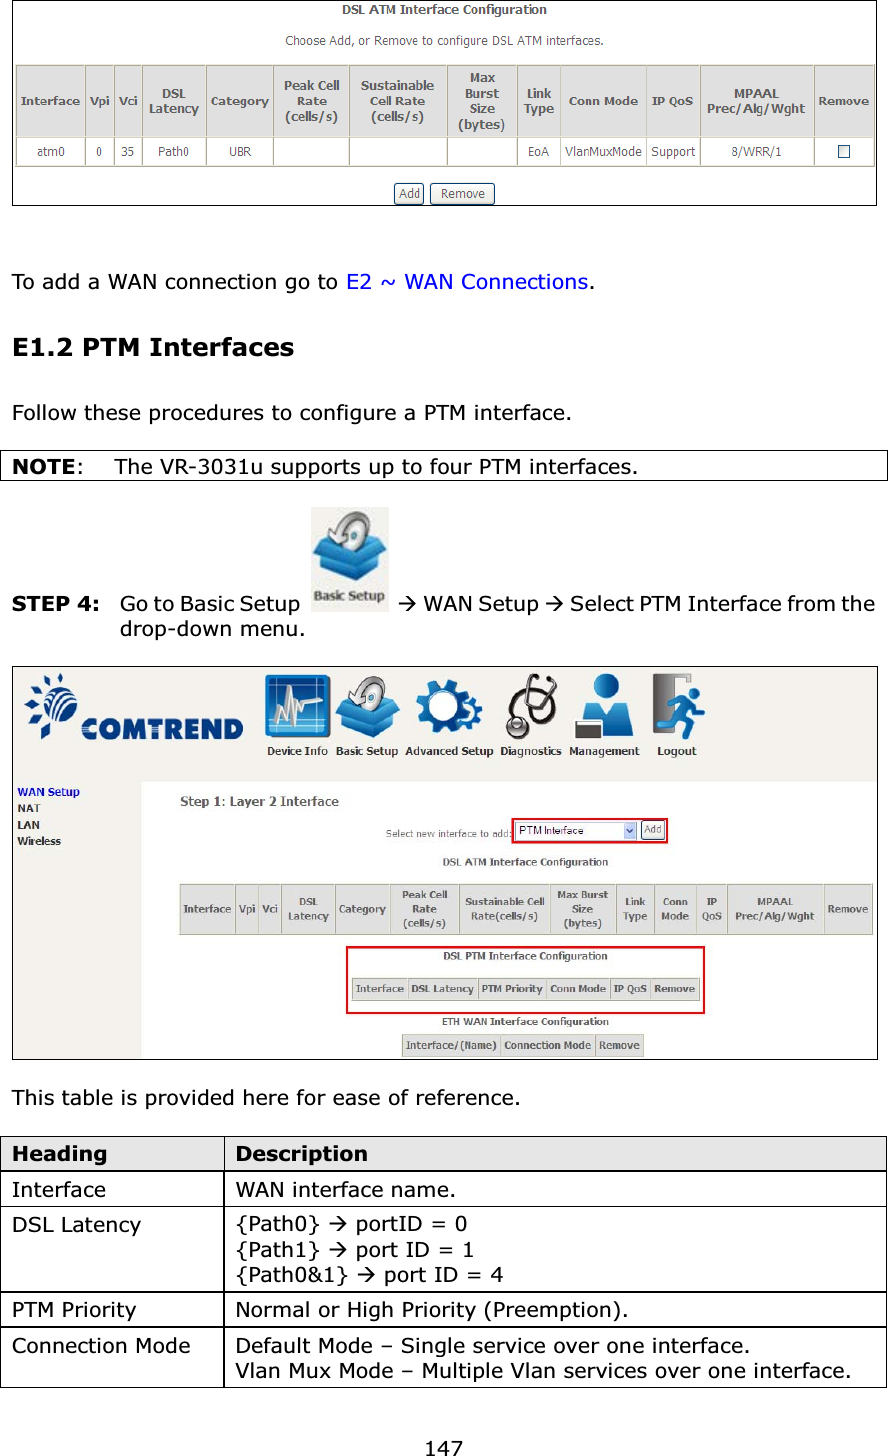 147To add a WAN connection go to E2 ~ WAN Connections.E1.2 PTM InterfacesFollow these procedures to configure a PTM interface.   NOTE: The VR-3031u supports up to four PTM interfaces. STEP 4: Go to Basic Setup ÆWAN Setup ÆSelect PTM Interface from the drop-down menu.This table is provided here for ease of reference.HeadingDescriptionInterface WAN interface name.DSL Latency {Path0} ÆportID = 0 {Path1} Æport ID = 1{Path0&amp;1} Æport ID = 4 PTM Priority Normal or High Priority (Preemption).Connection Mode Default Mode – Single service over one interface.Vlan Mux Mode – Multiple Vlan services over one interface.